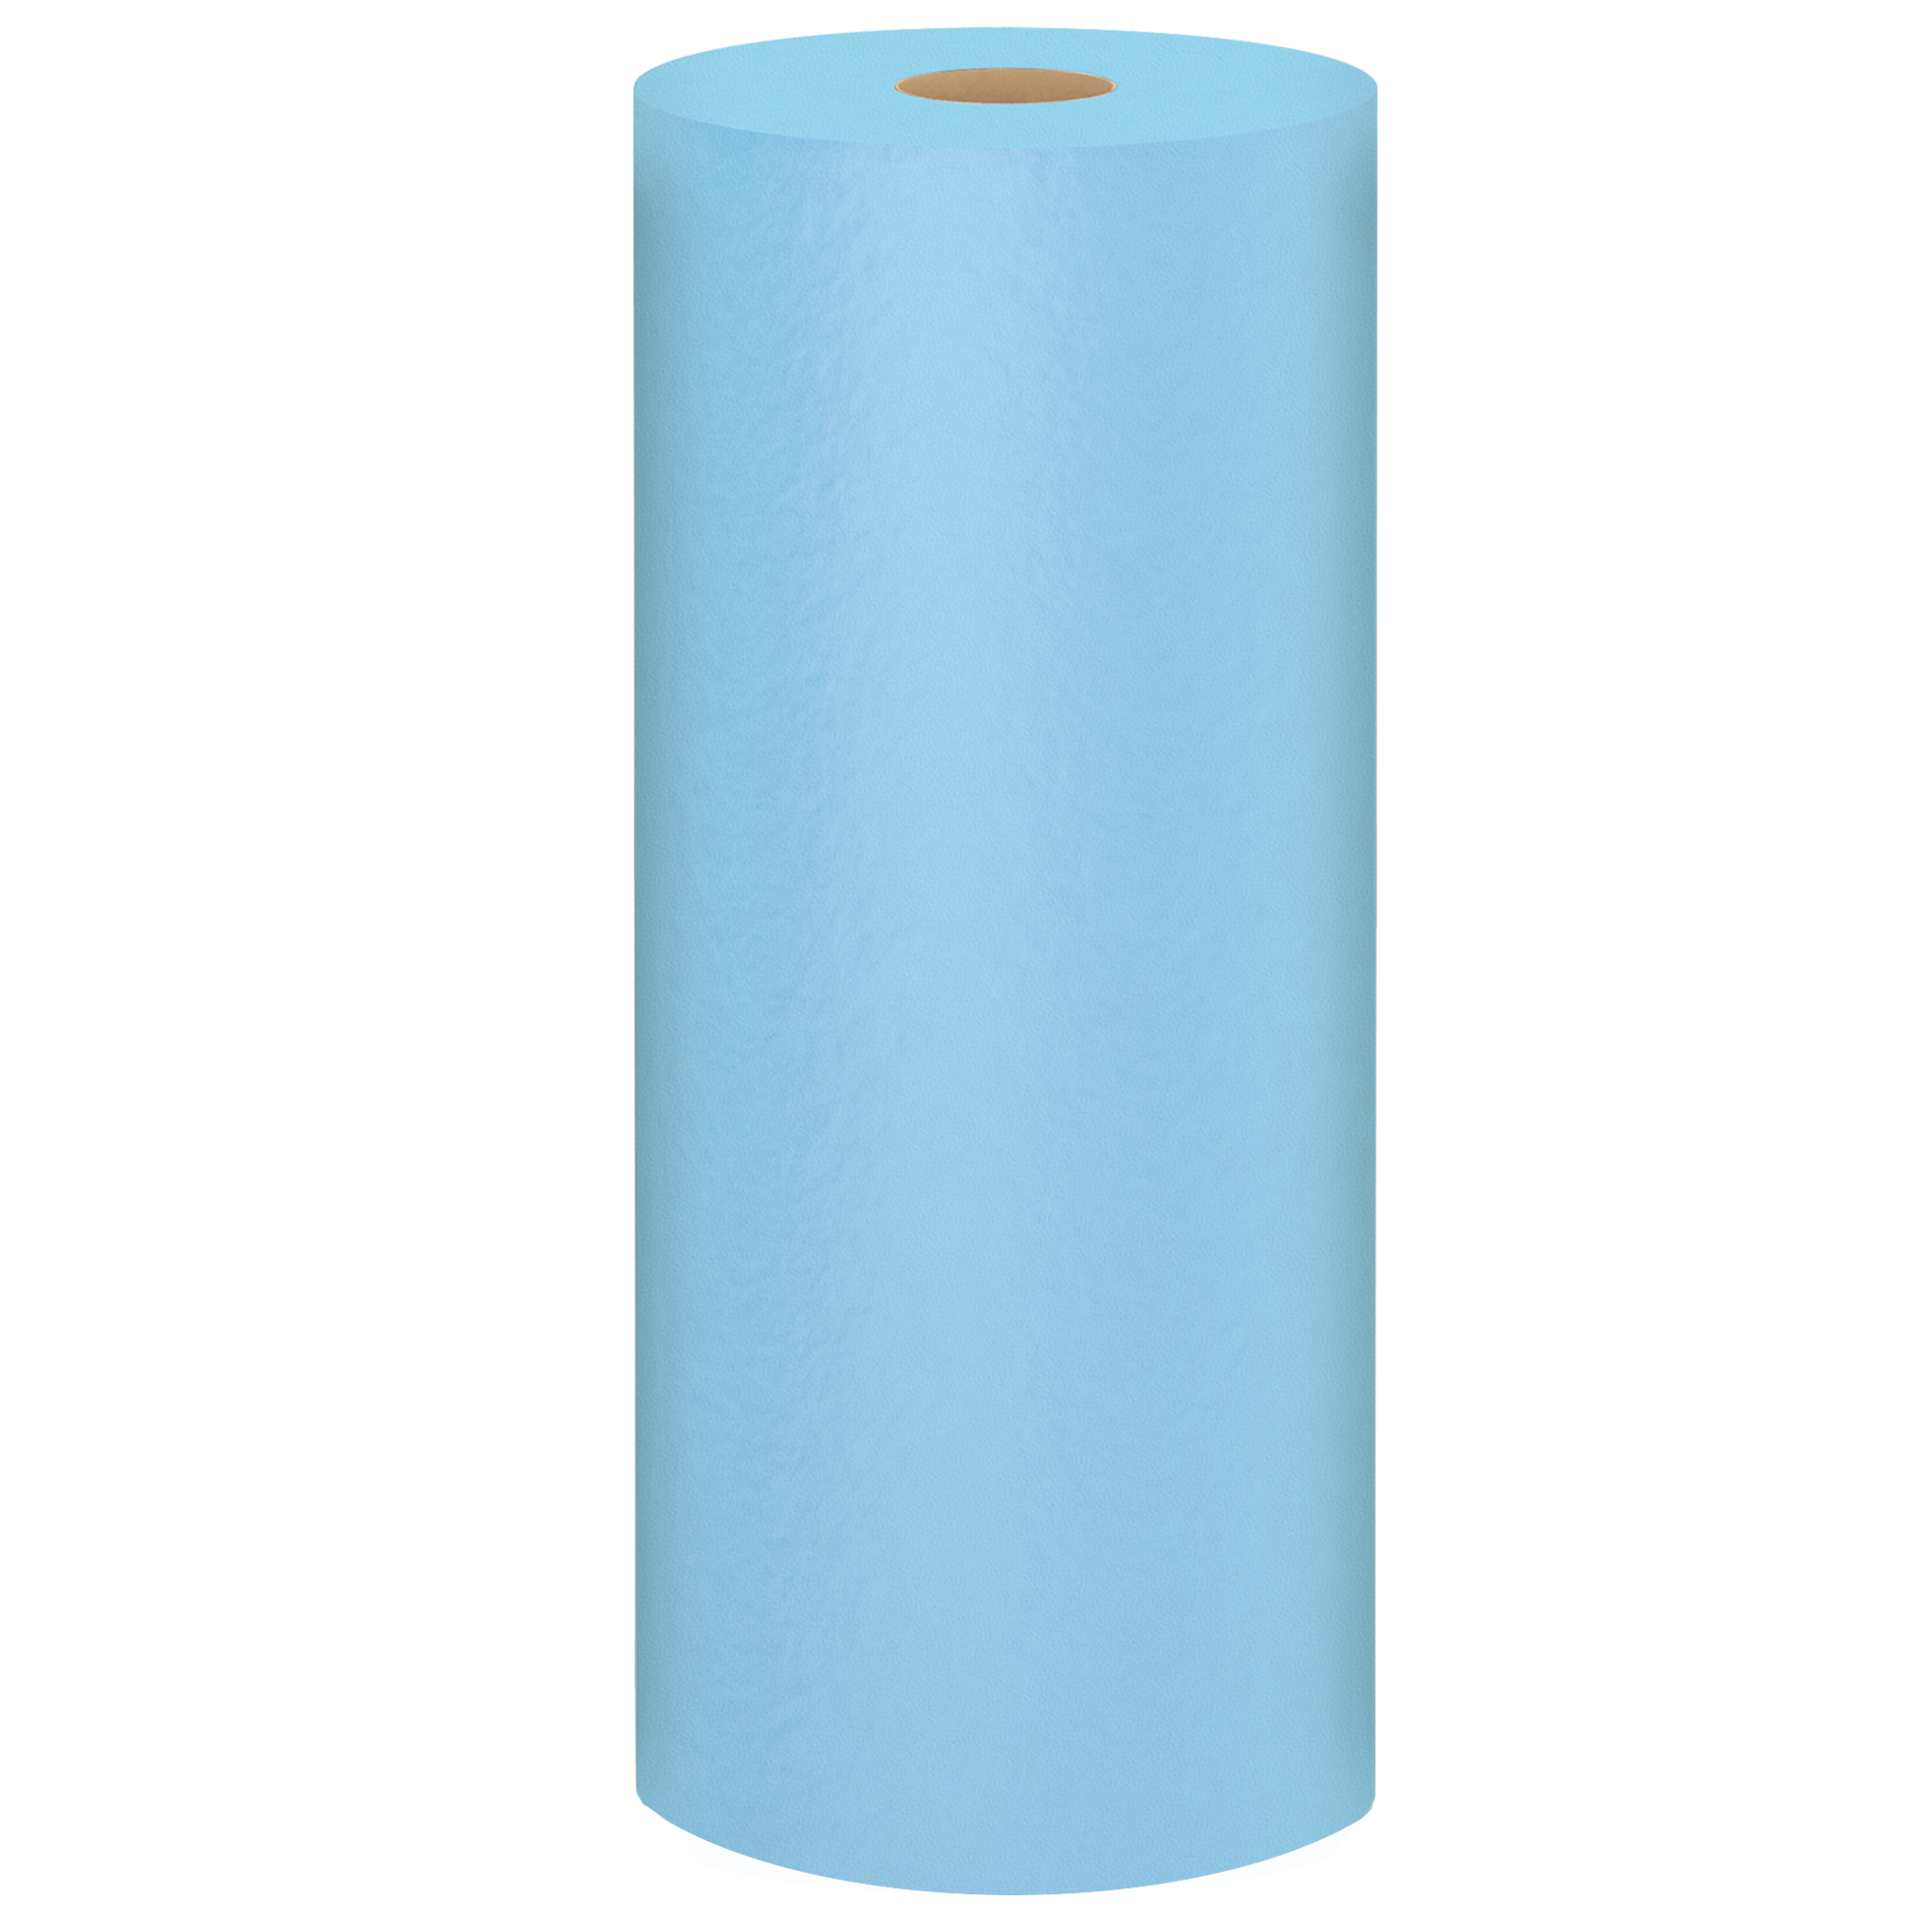 Picture of Shop Towels, Standard Roll, 10 2/5 x 11, Blue, 55/Roll, 30 Rolls/Carton